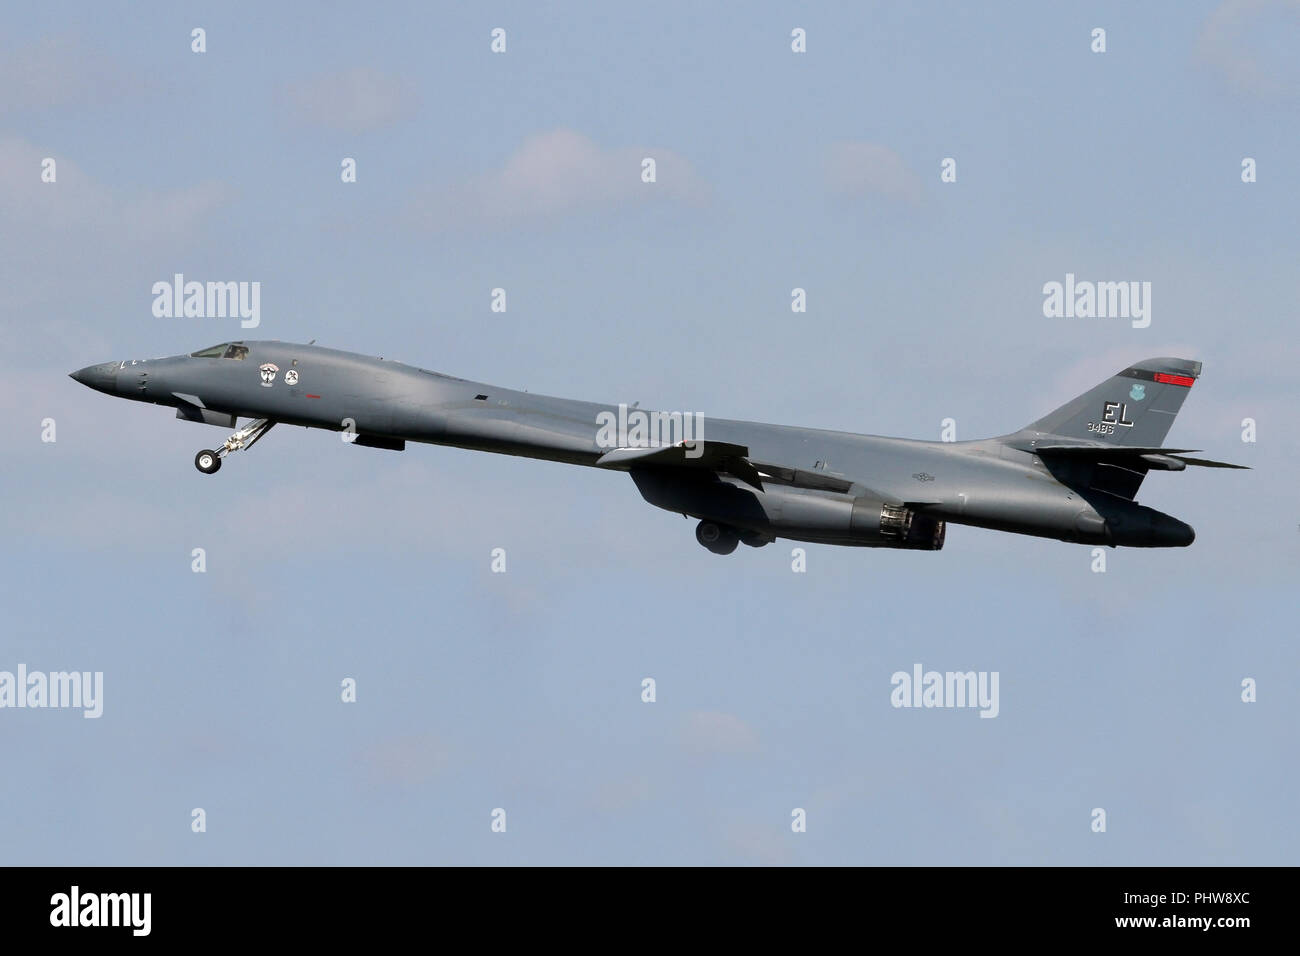 Rockwell B-1B Lancer from the 34th Bomb Squadron at Ellsworth AFB, South Dakota climbing out of RAF Mildenhall, Suffolk after a brief fuel stop. Stock Photo